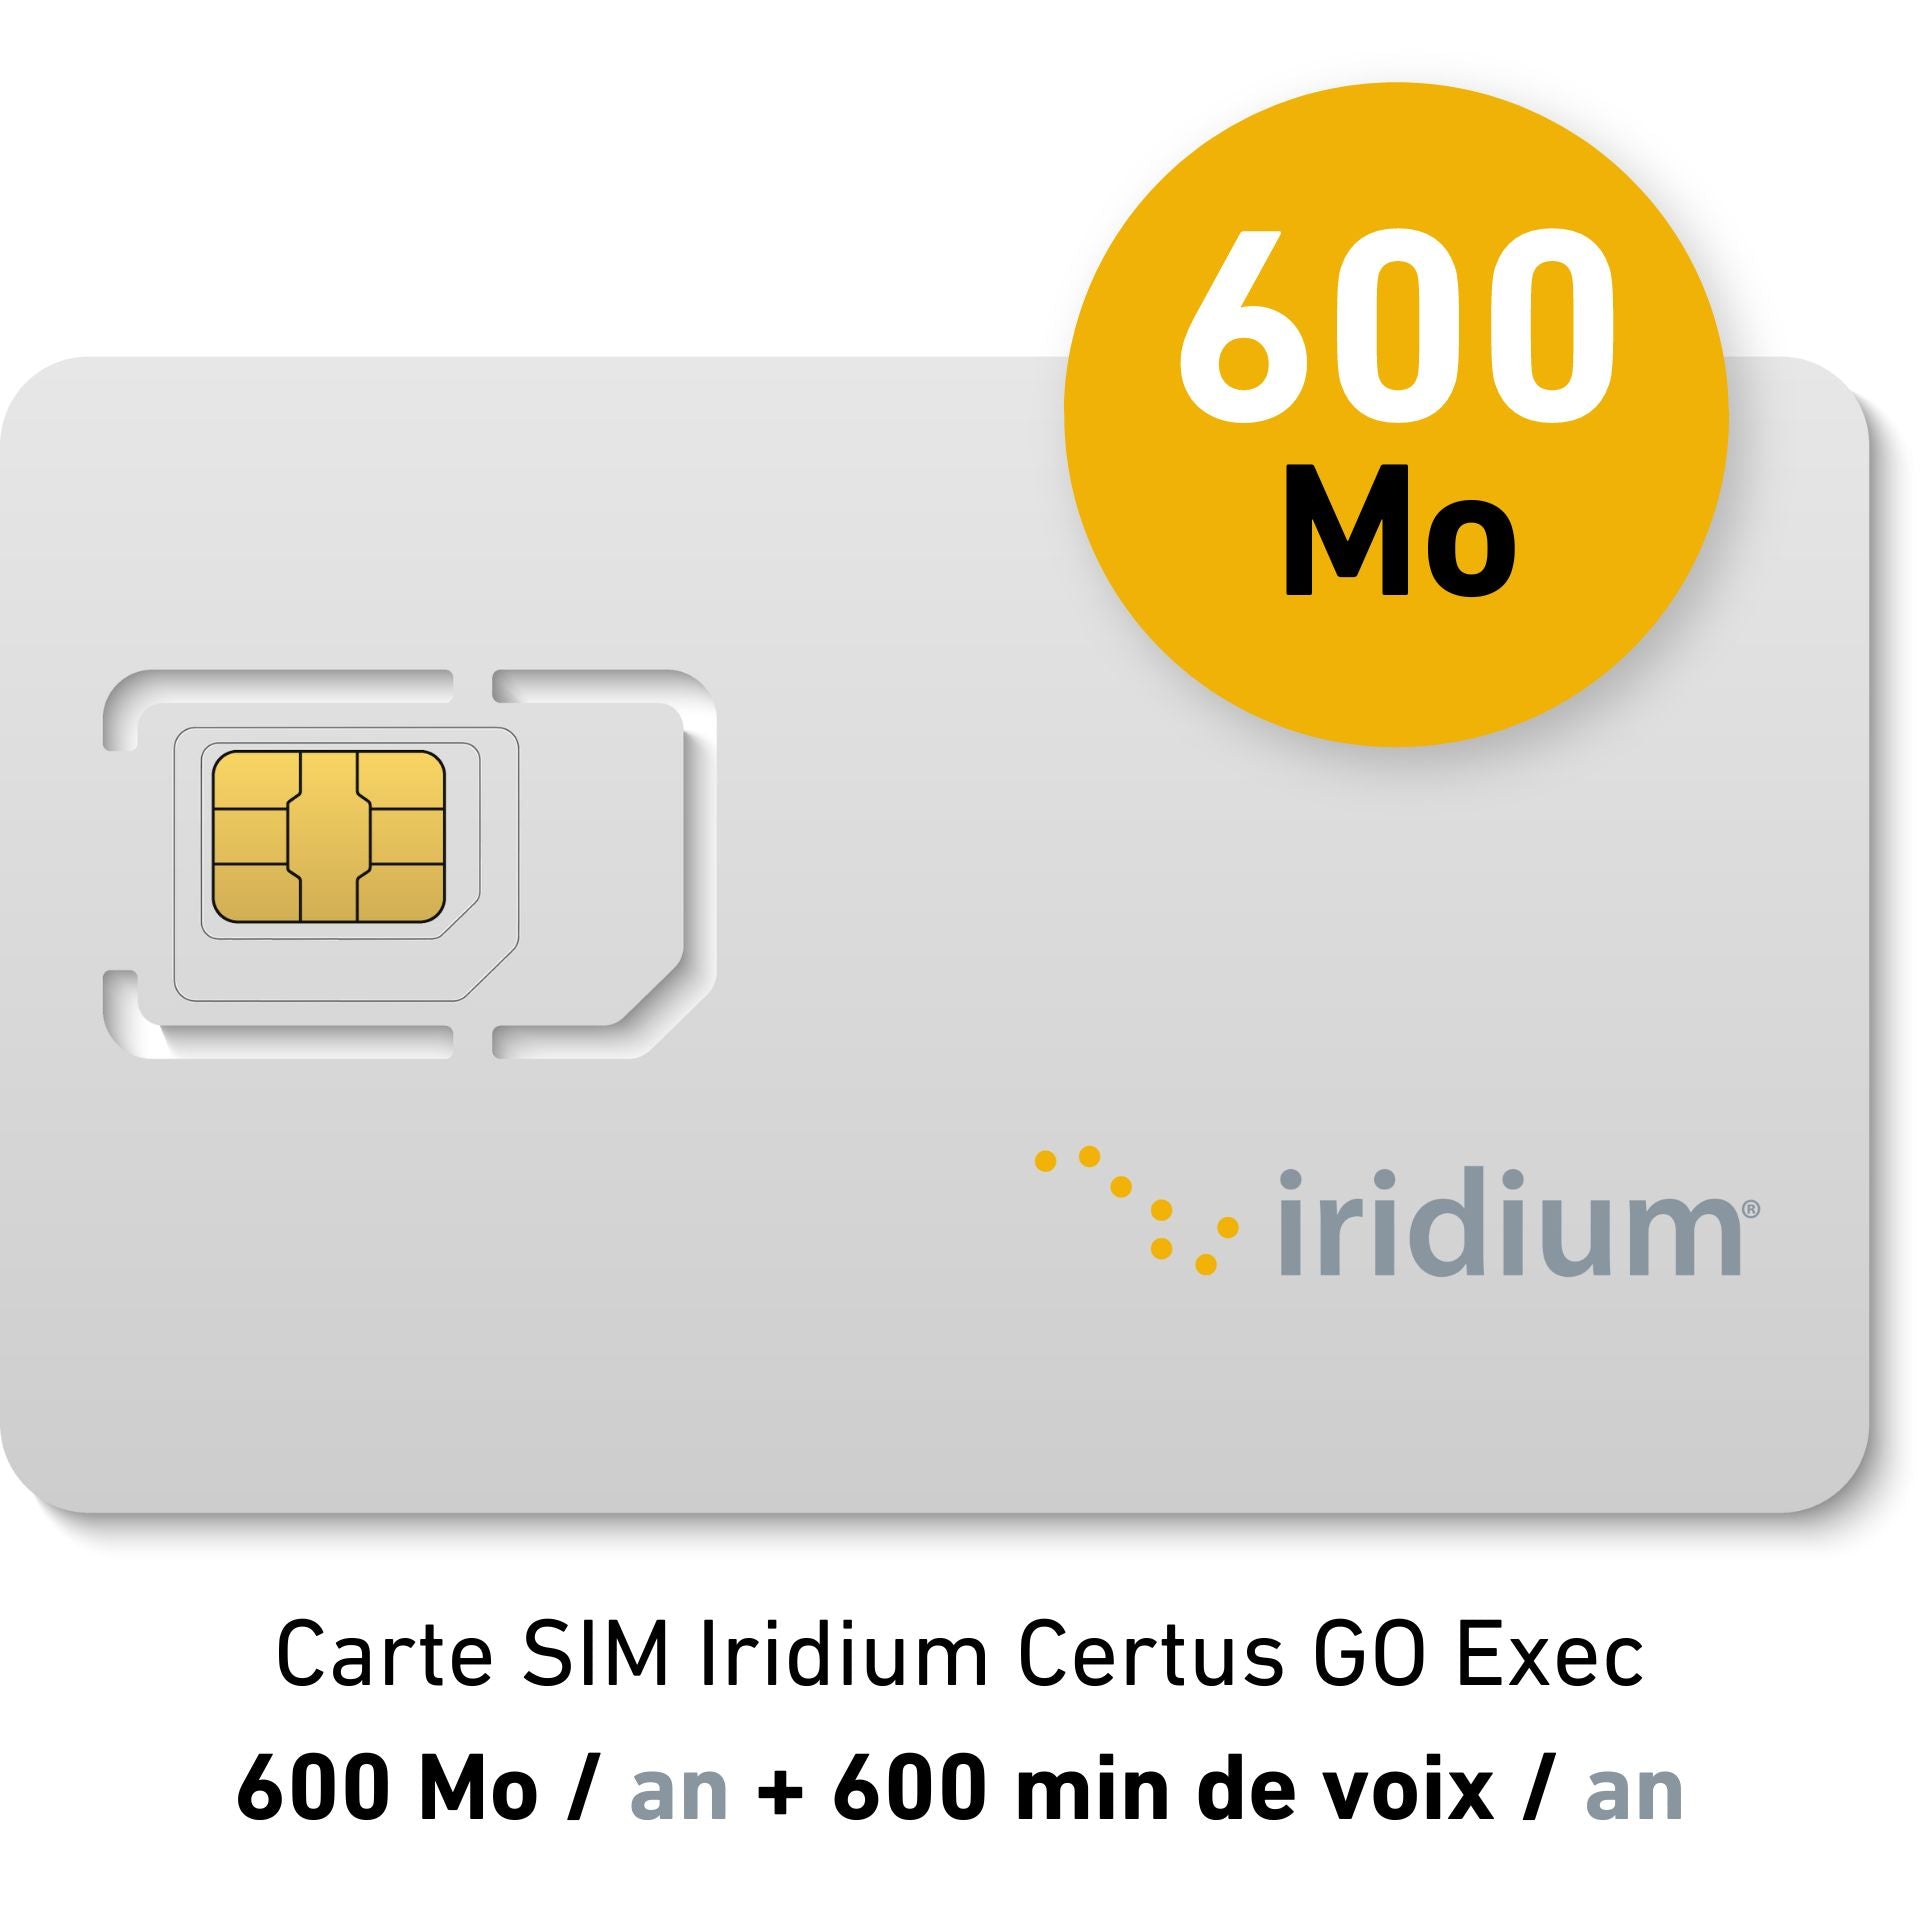 Iridium Certus GO Exec Yearly Yachting Subscription - 600MB/year -Data Doubled + 600min voice calls/year